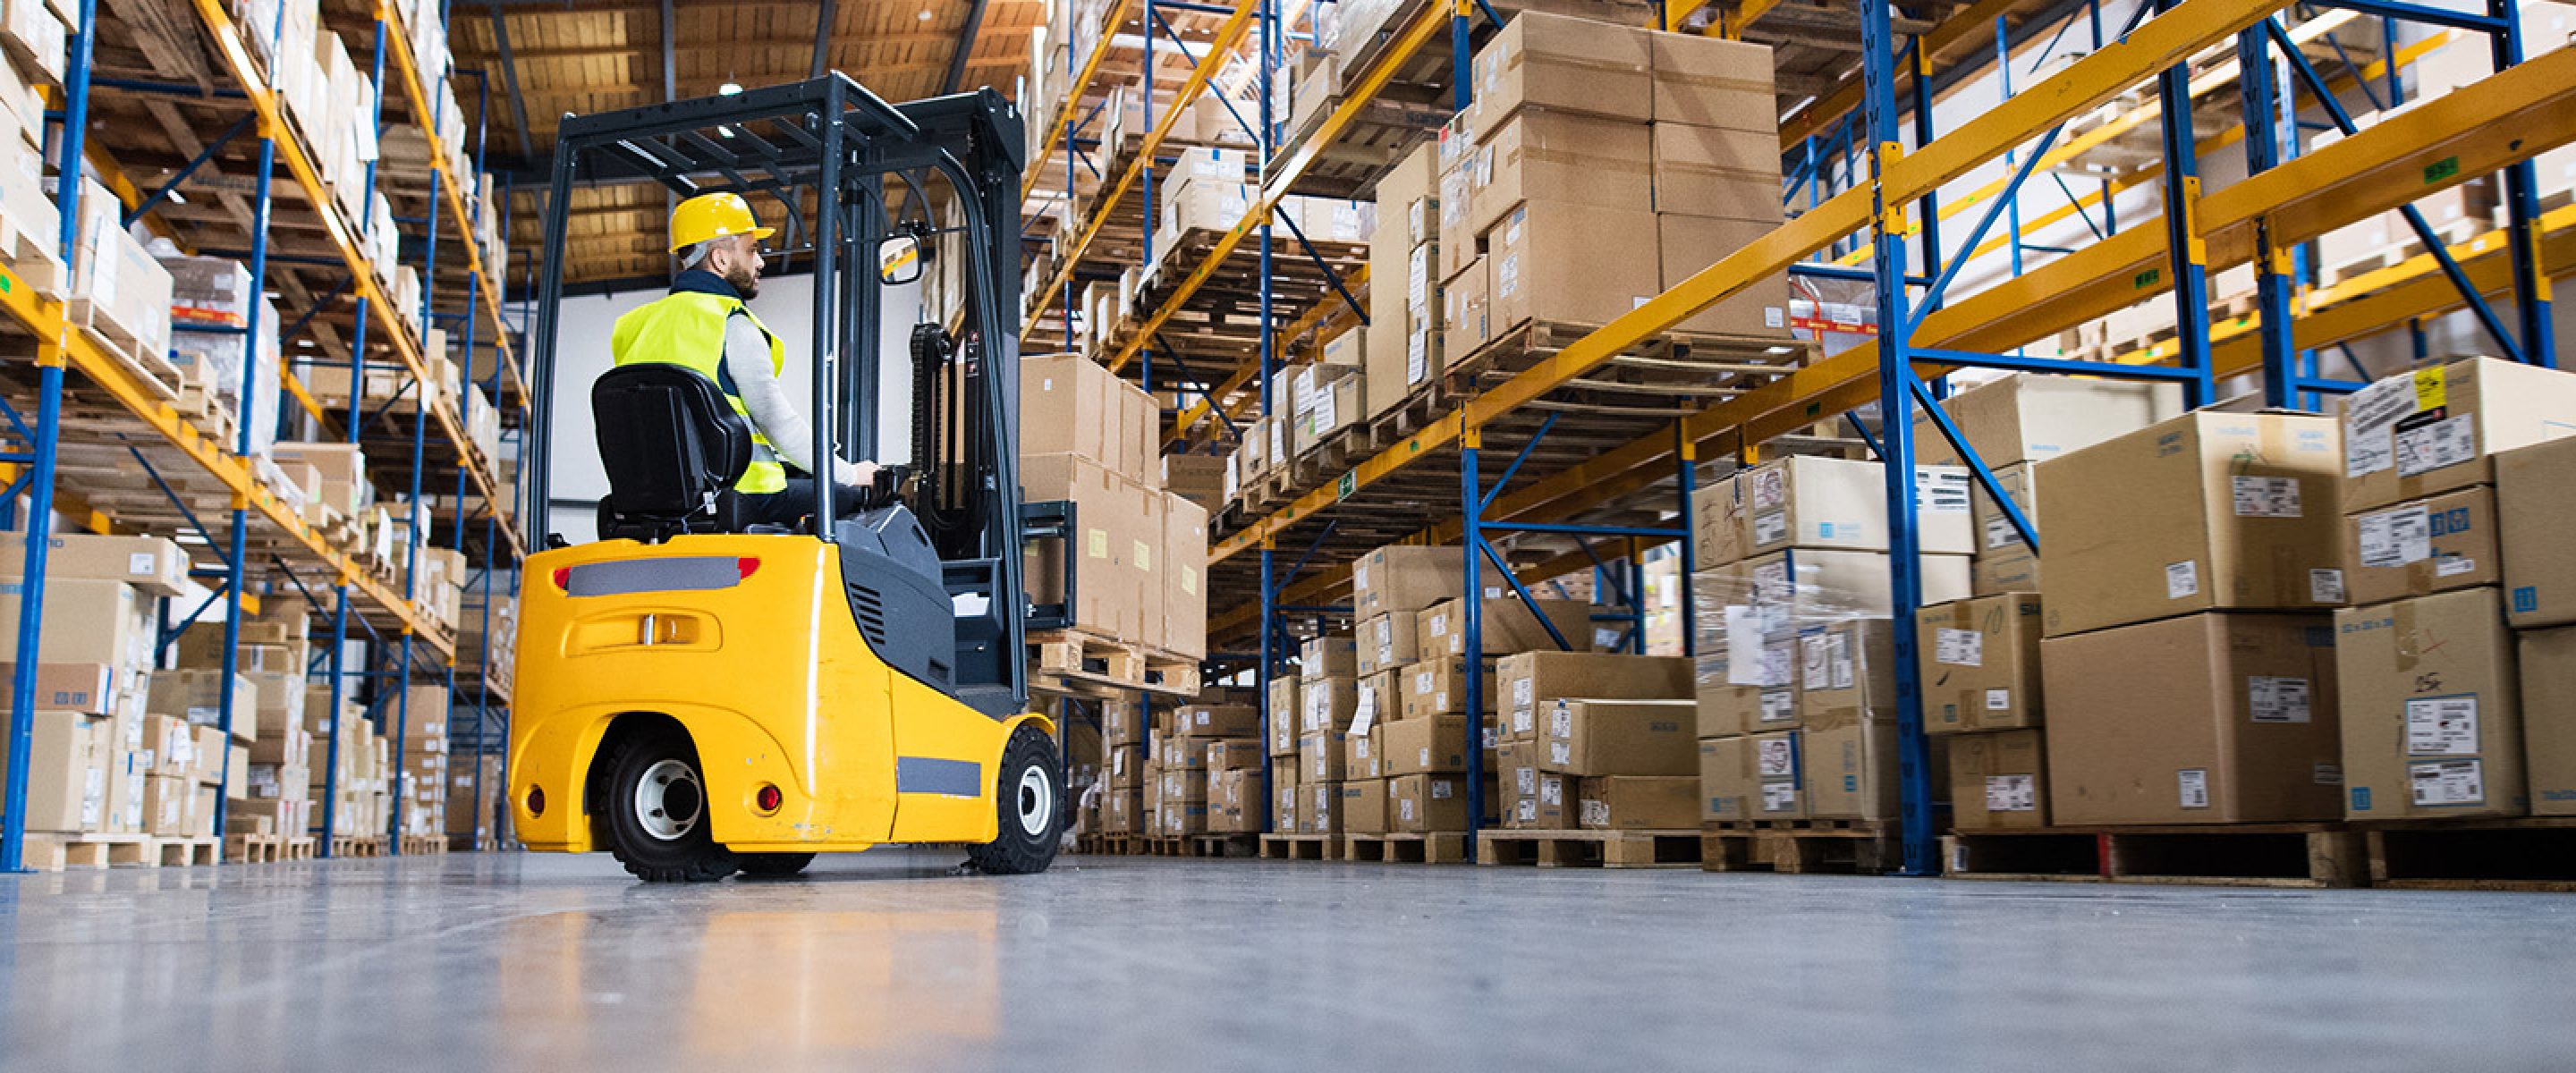 Male factory worker drives fork lift through aisles of shelved boxes